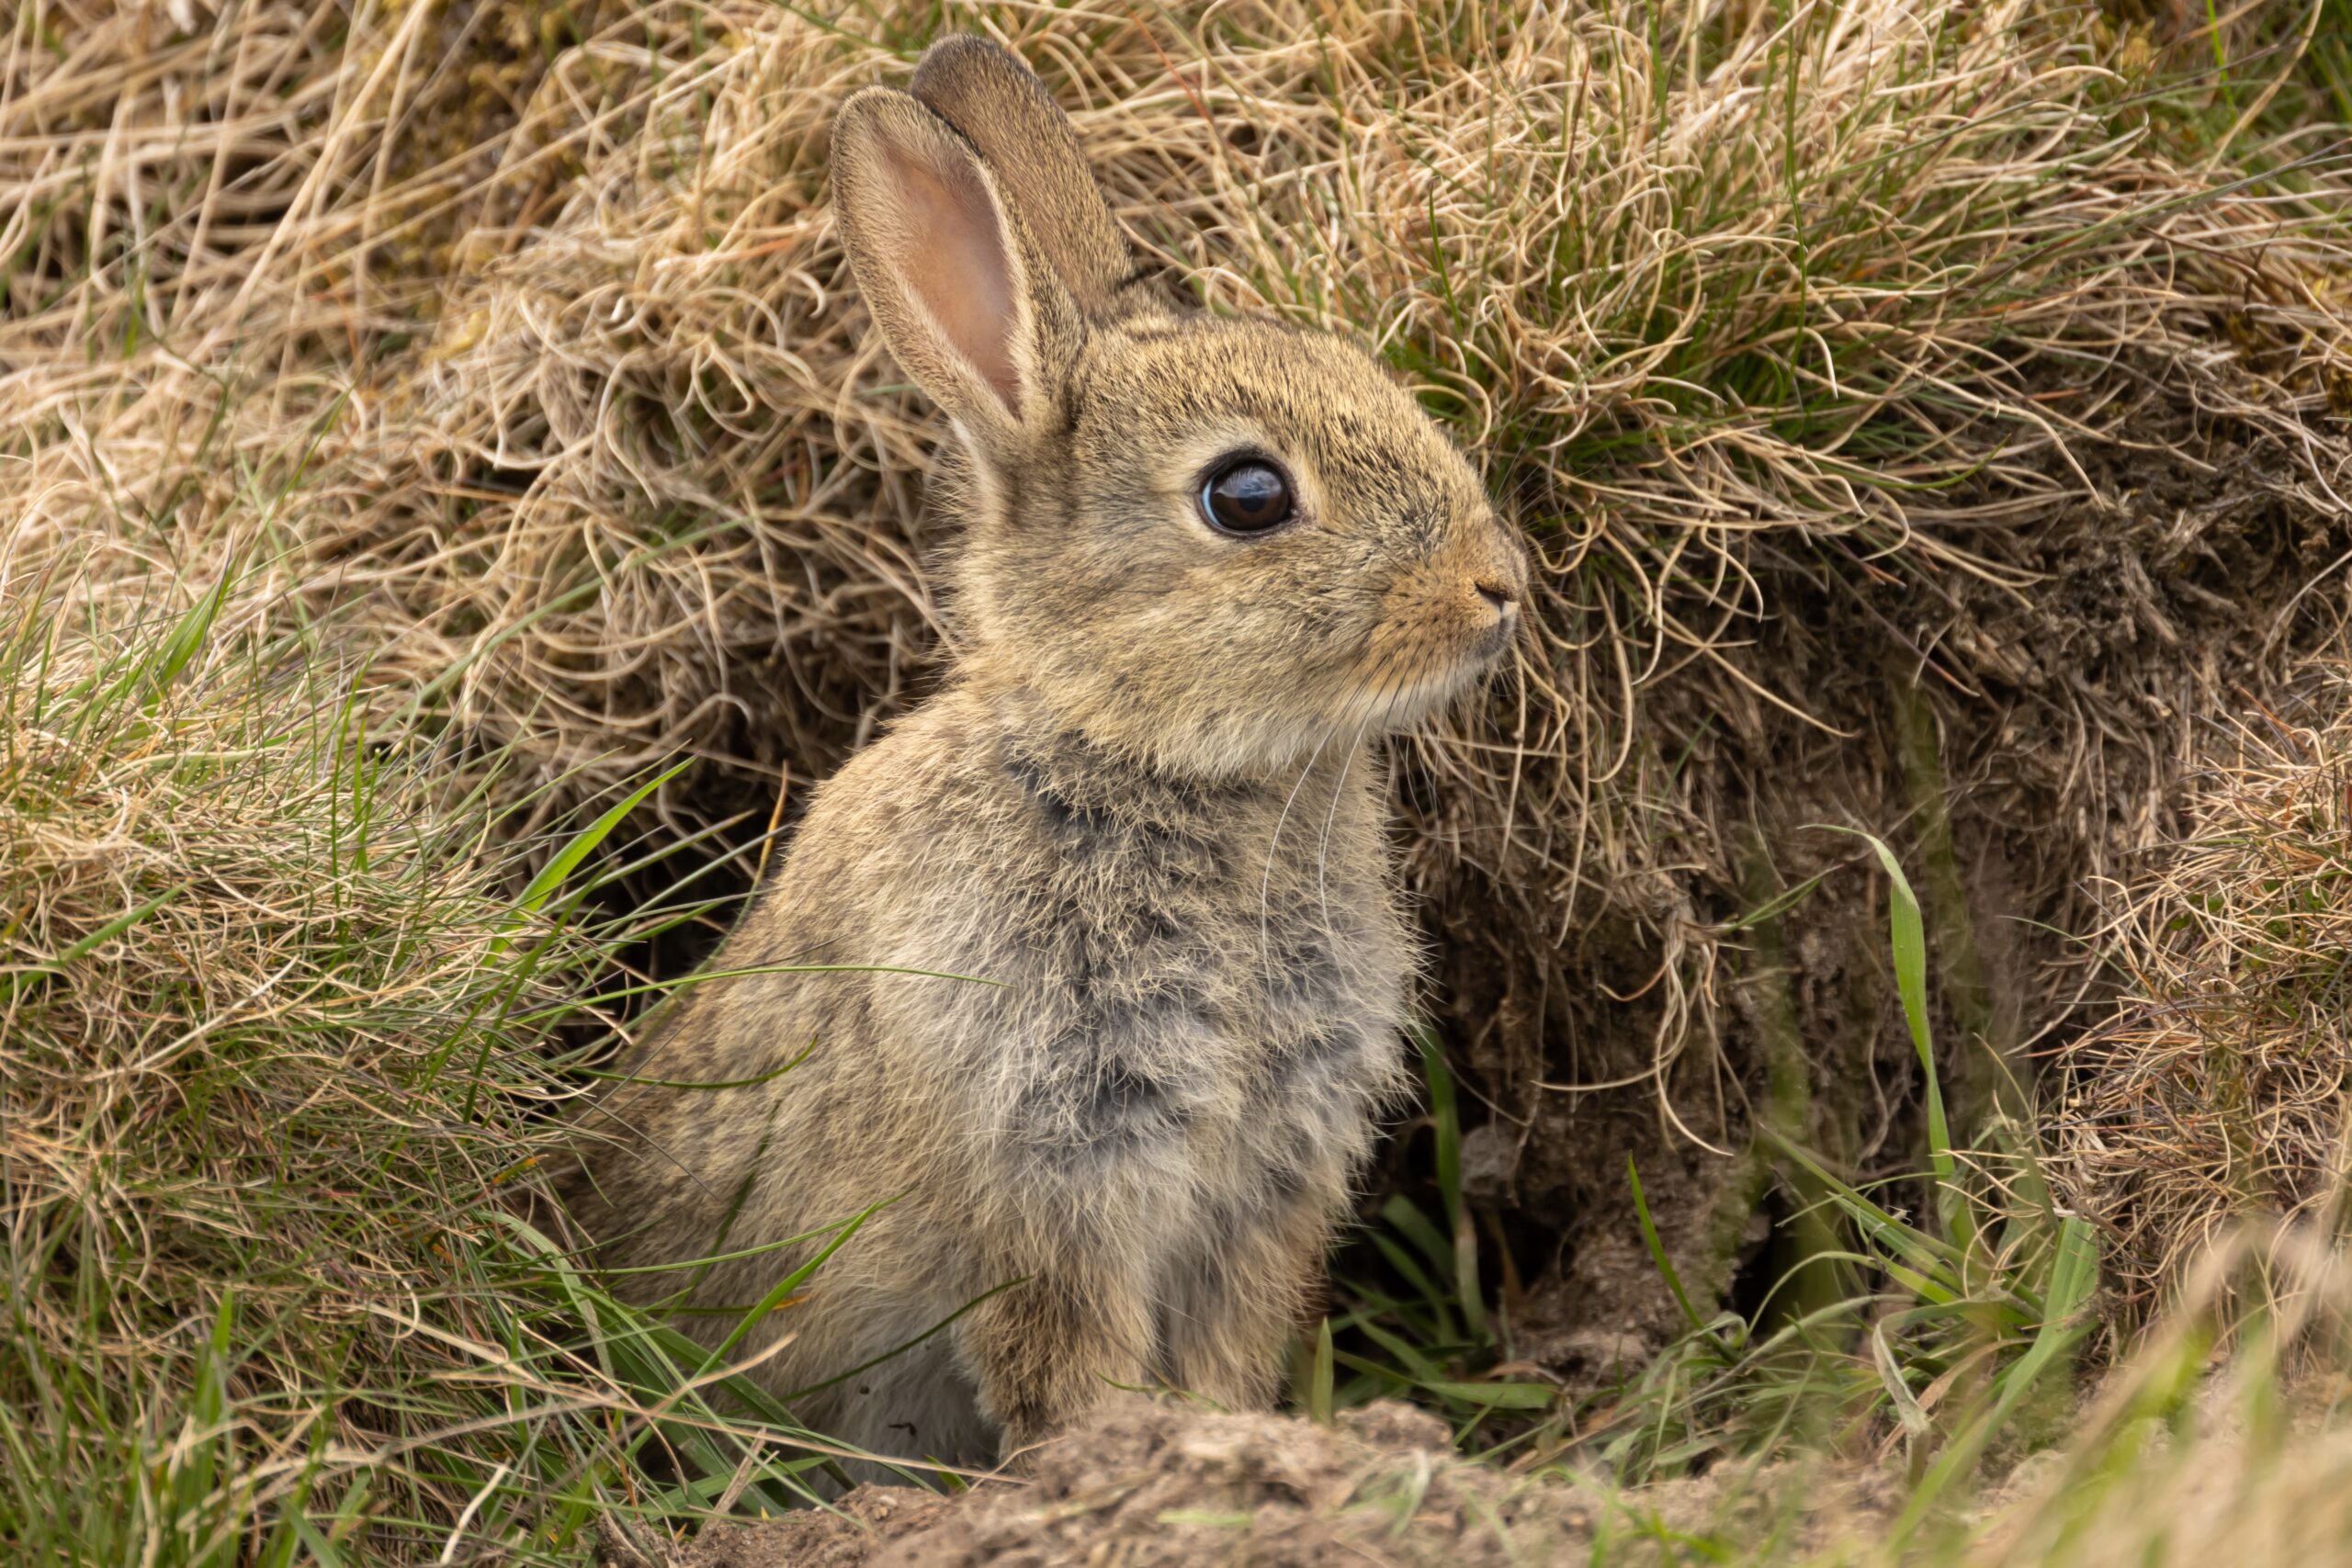 Rabbit emerging from a burrow